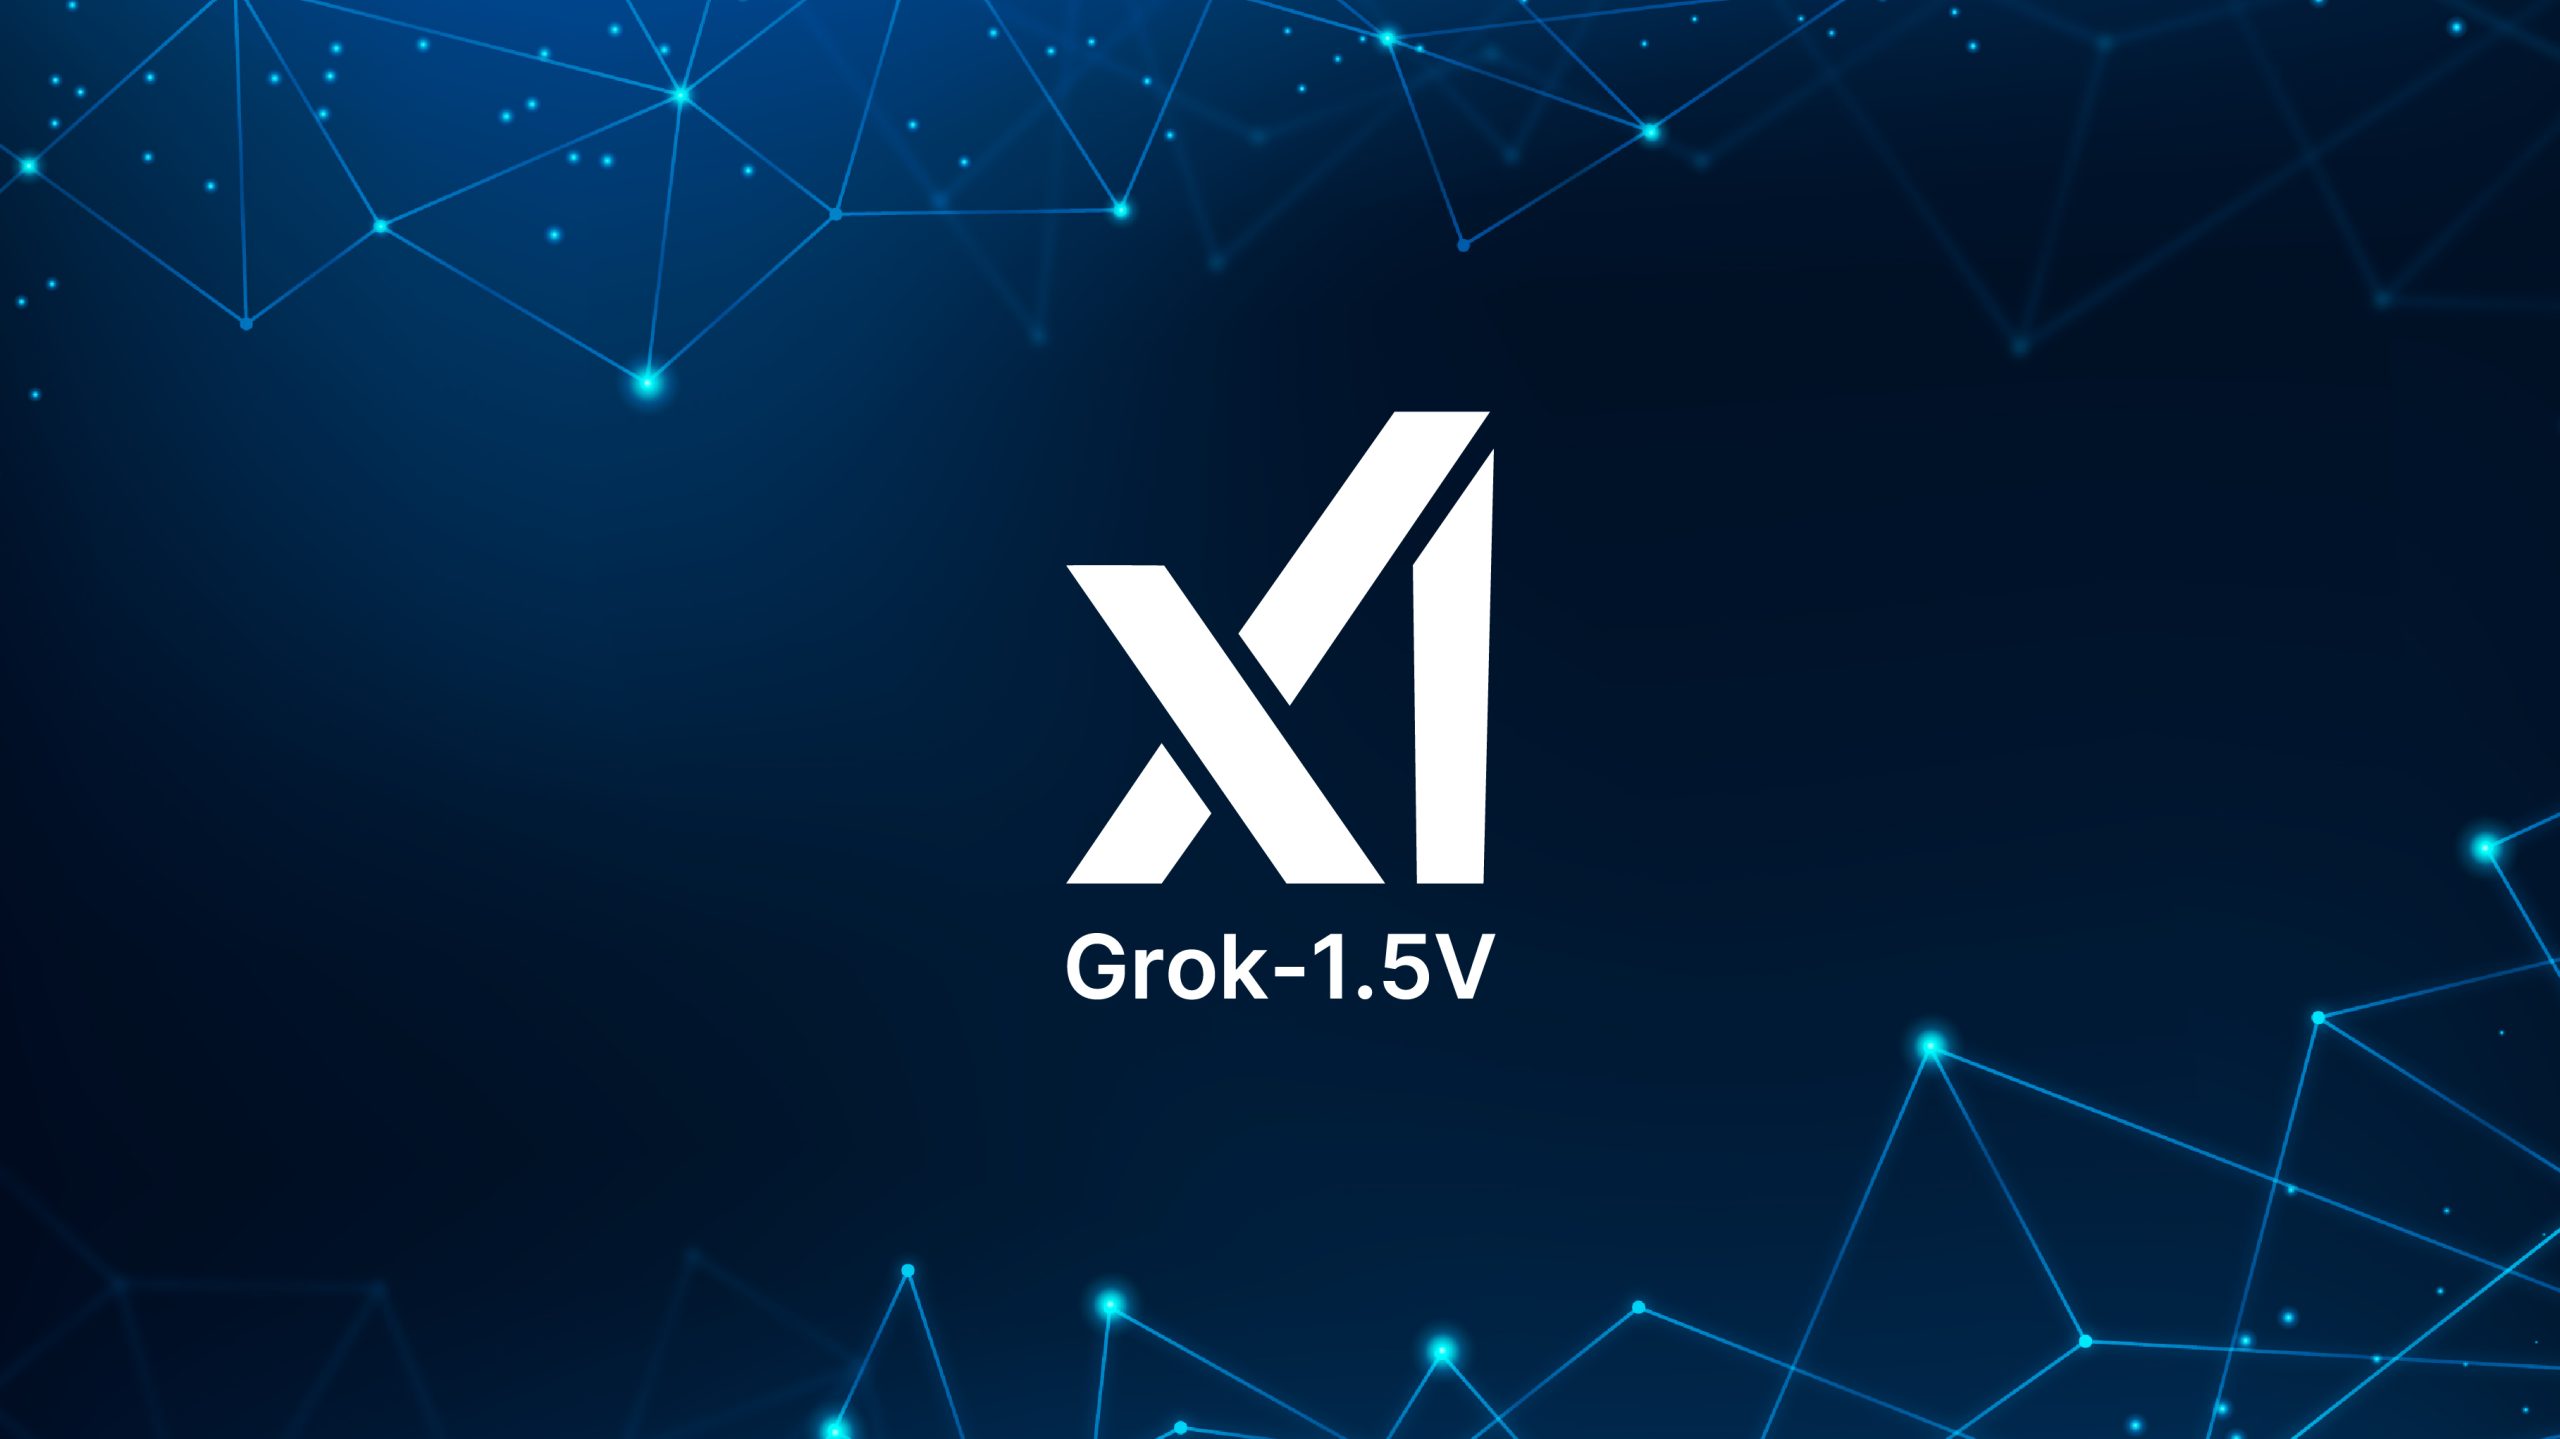 Grok-1.5V: Setting New Standards in AI with Multimodal Integration